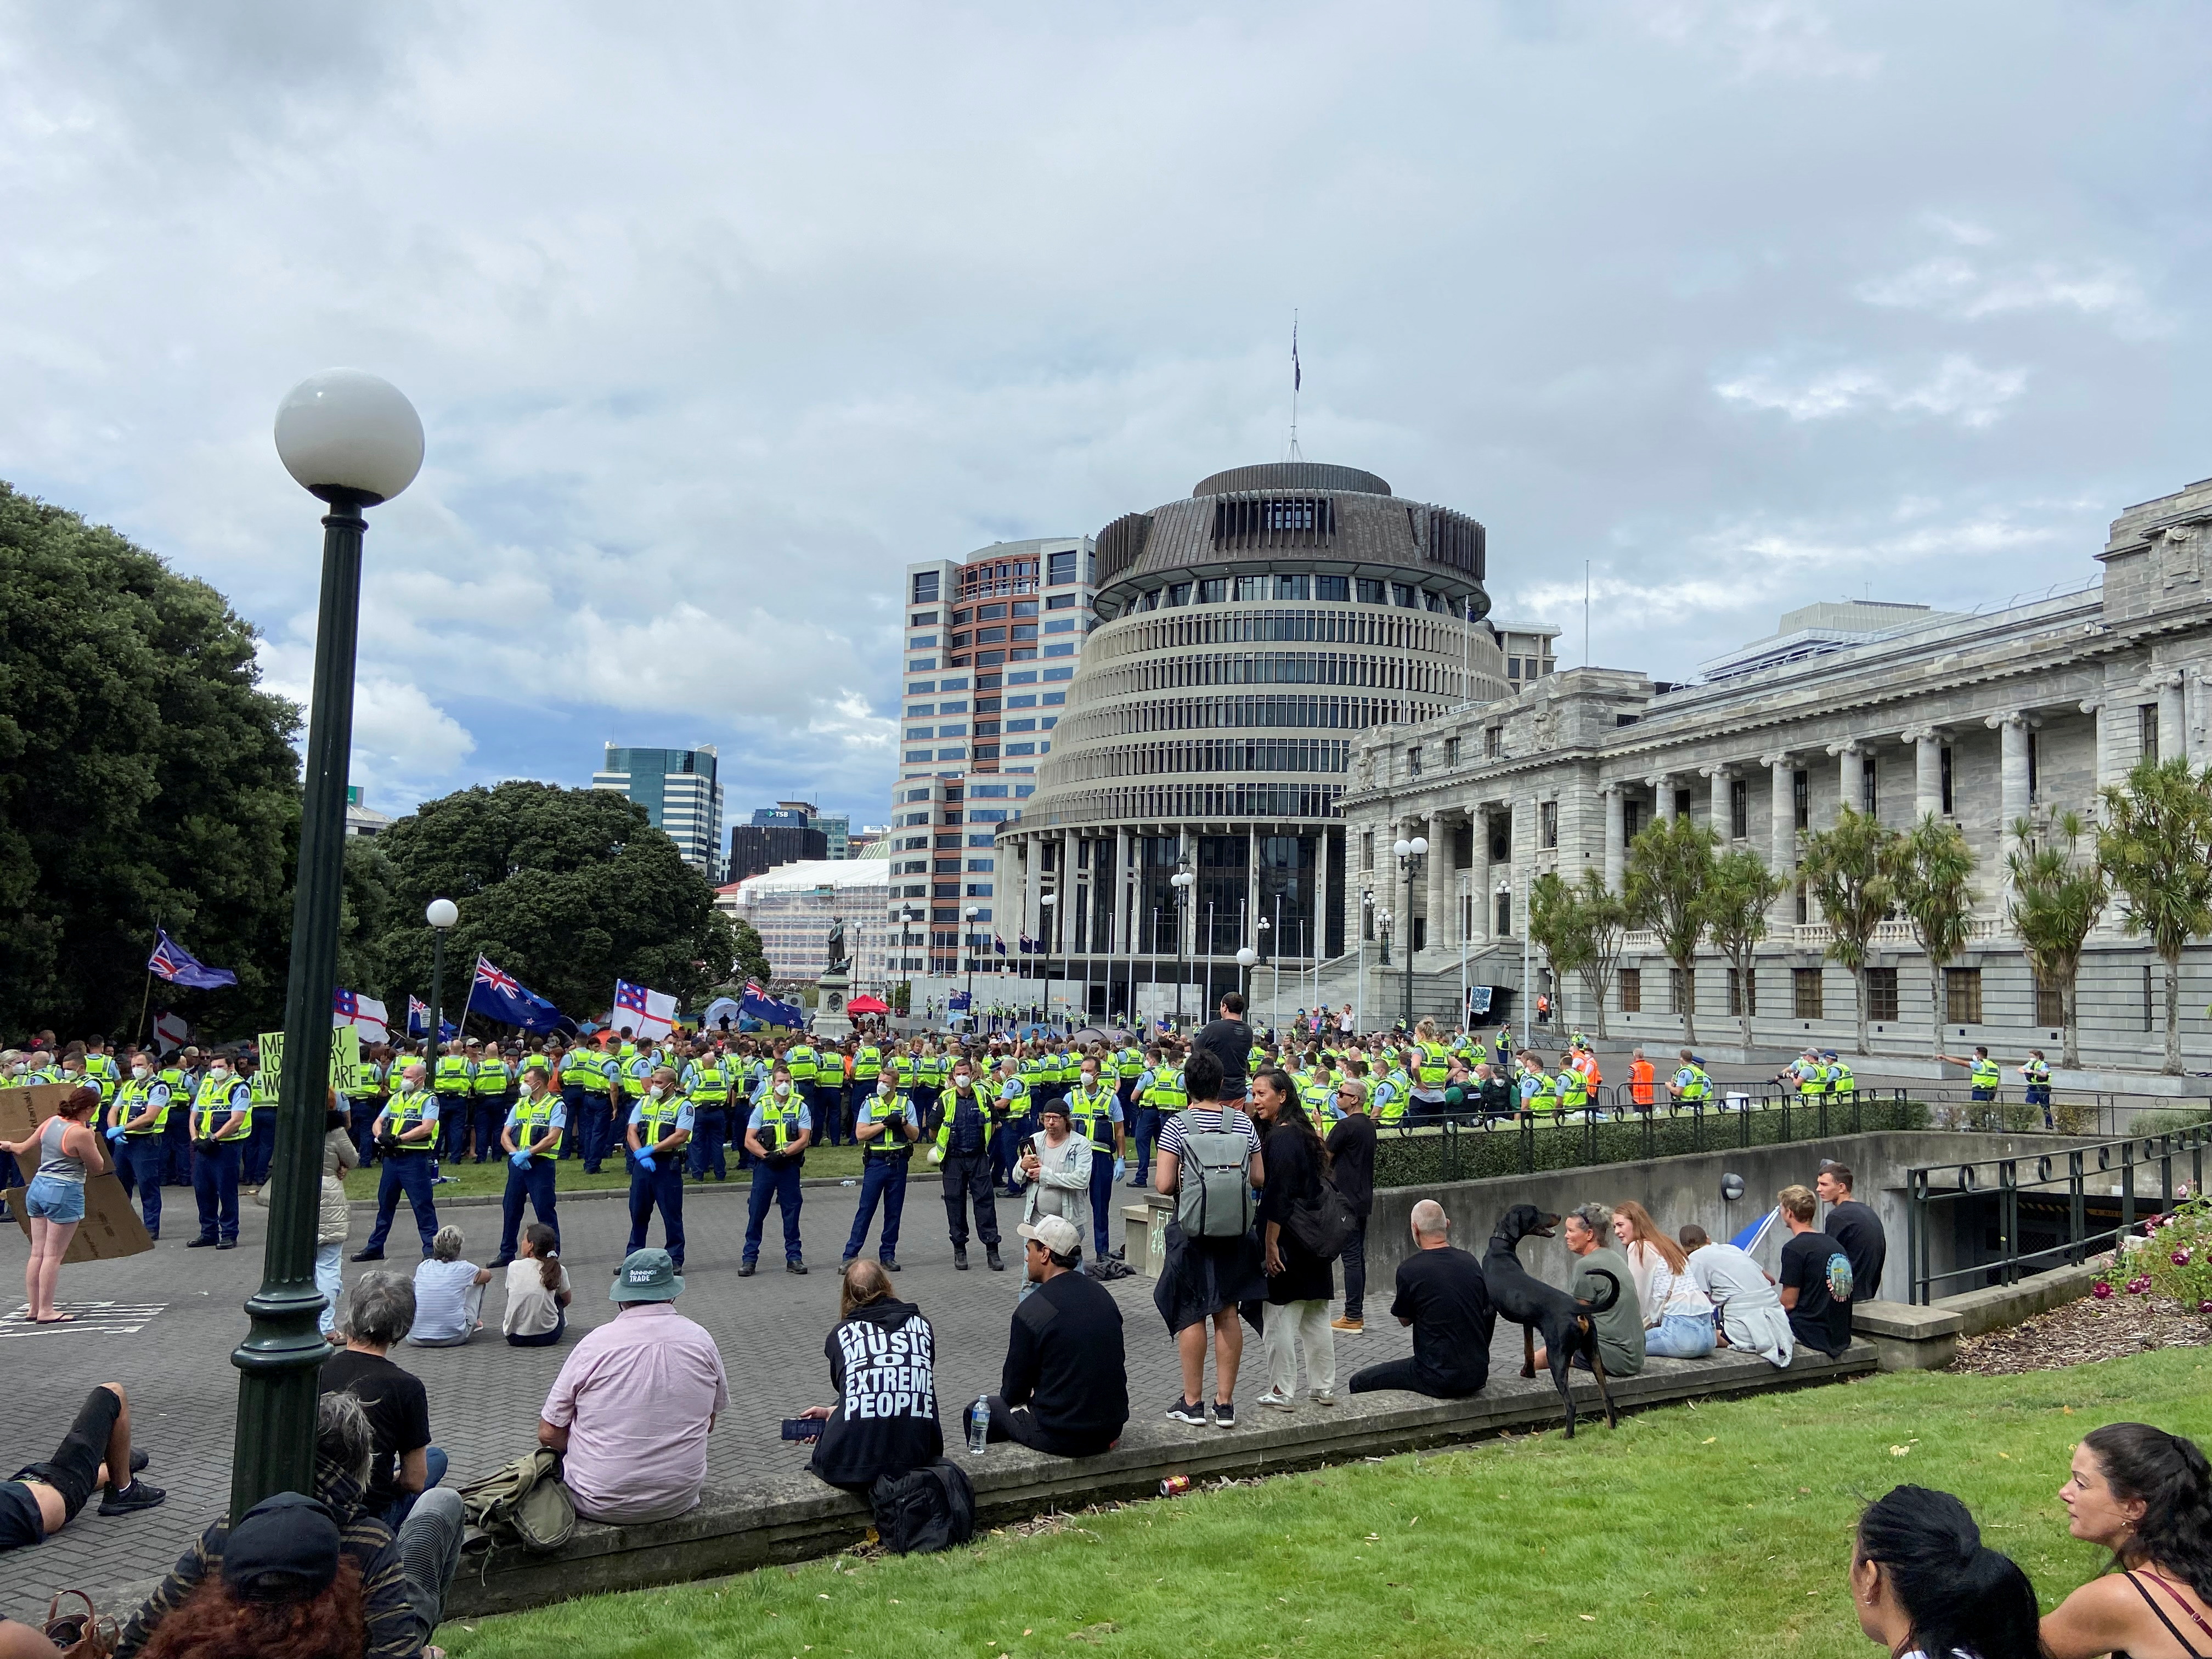 Anti-vaccine mandate protesters gather to demonstrate in front of the parliament, in Wellington